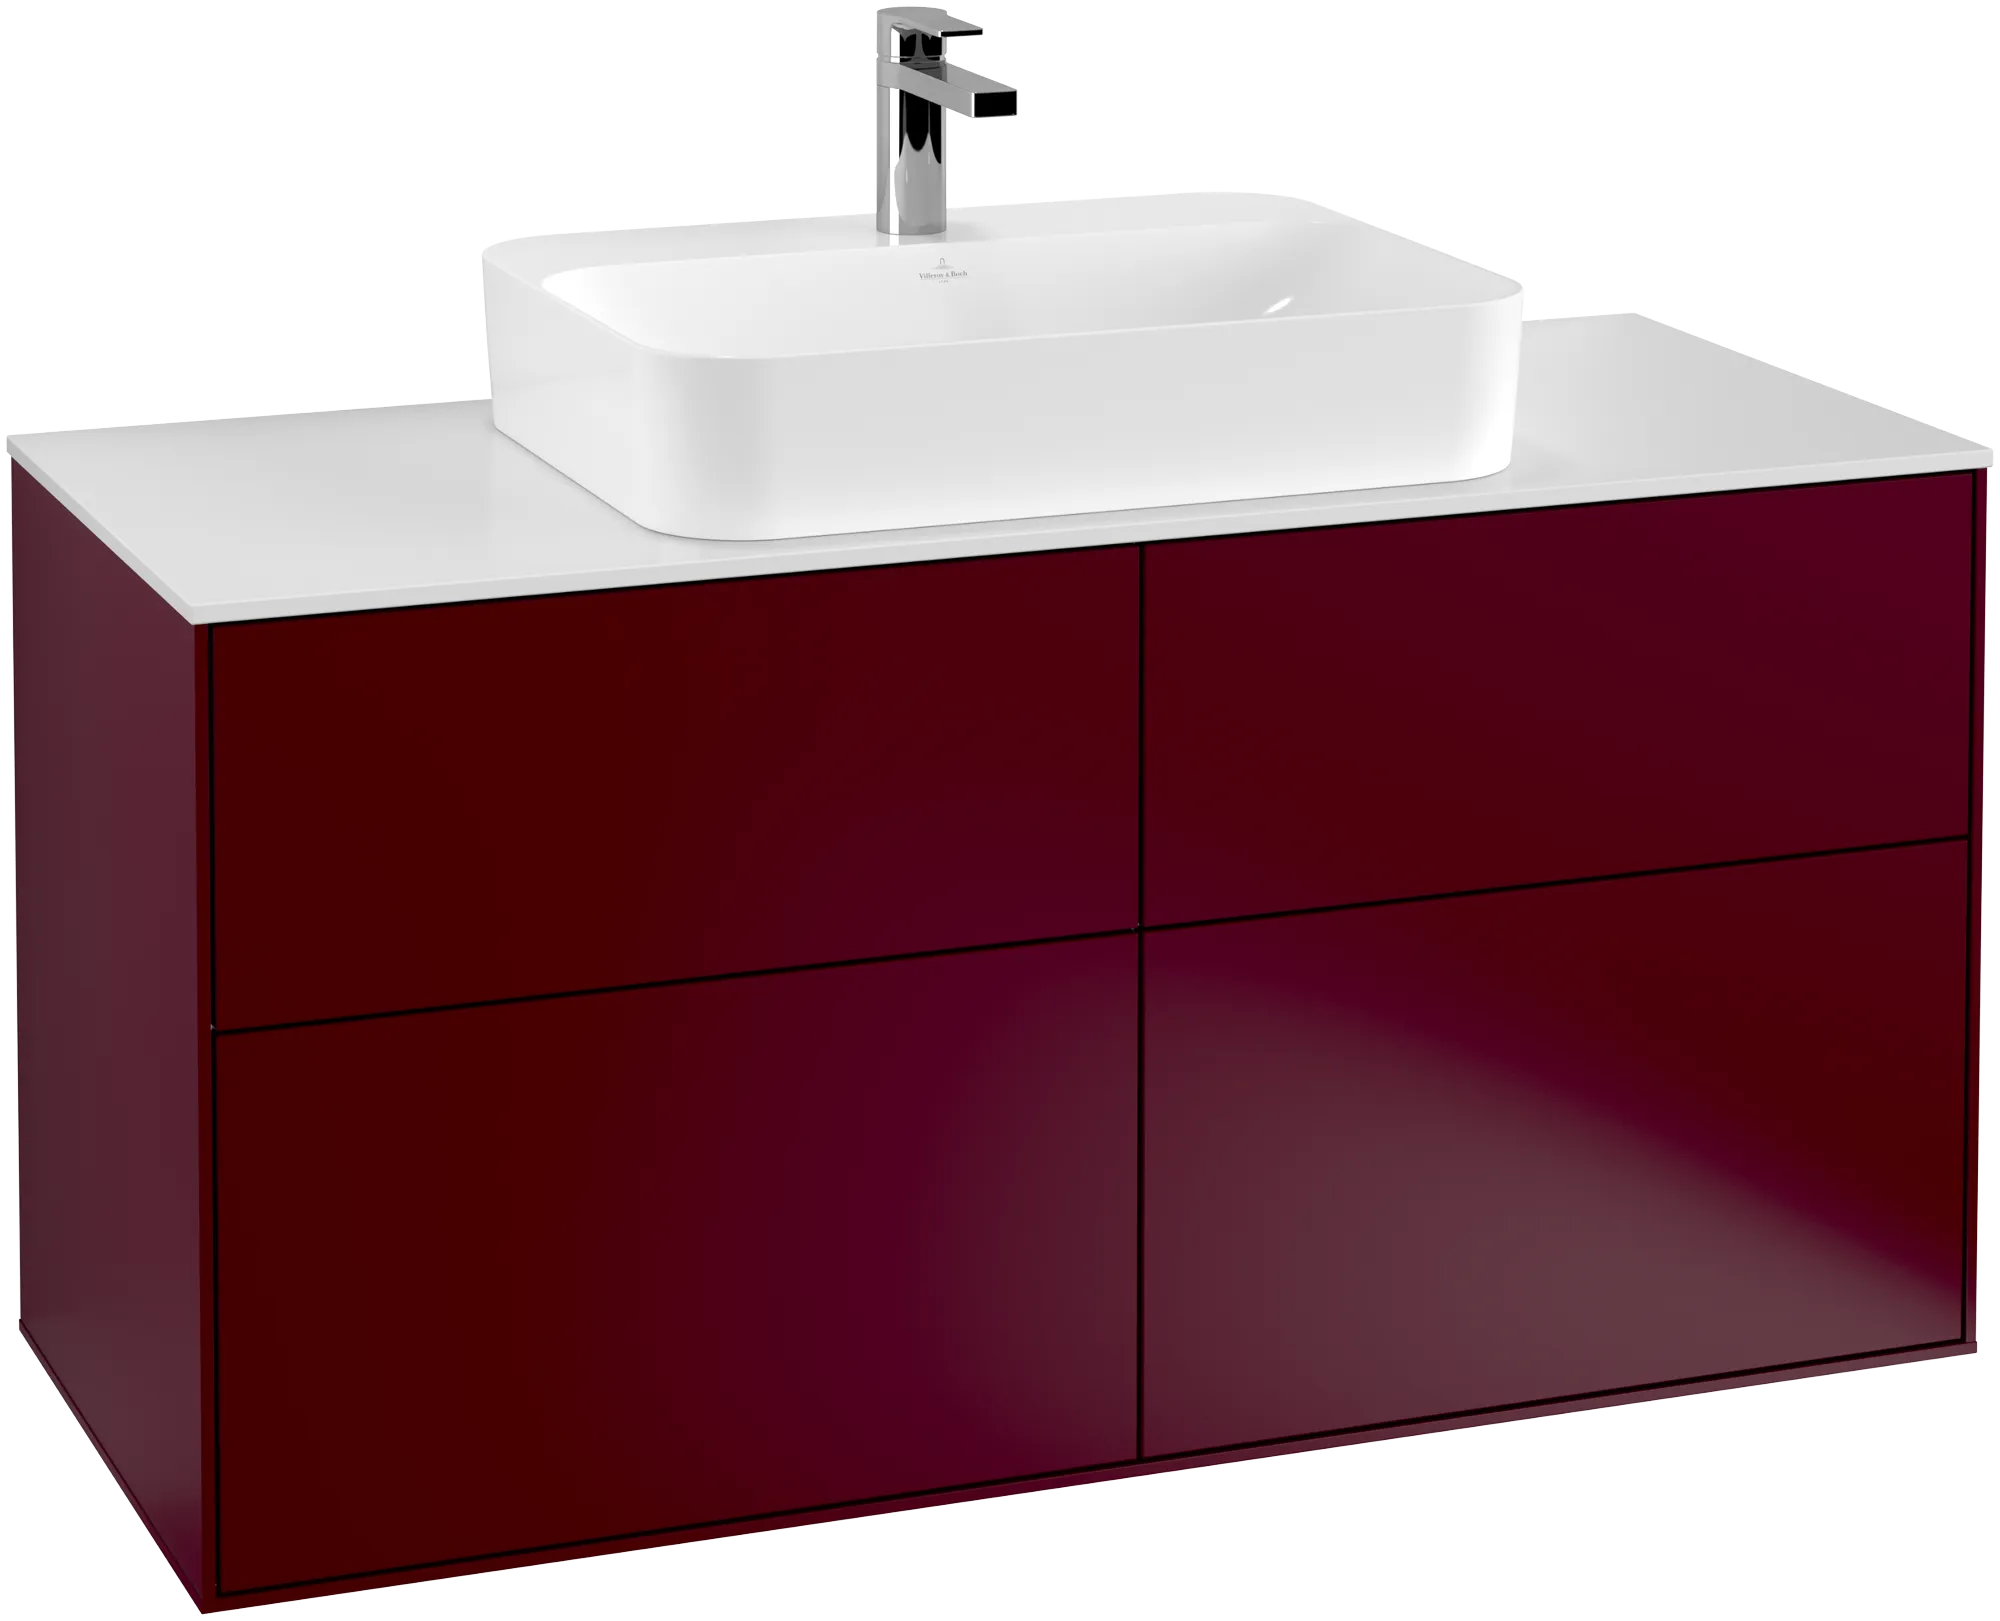 VILLEROY BOCH Finion Vanity unit, with lighting, 4 pull-out compartments, 1200 x 603 x 501 mm, Peony Matt Lacquer / Glass White Matt #G38100HB resmi